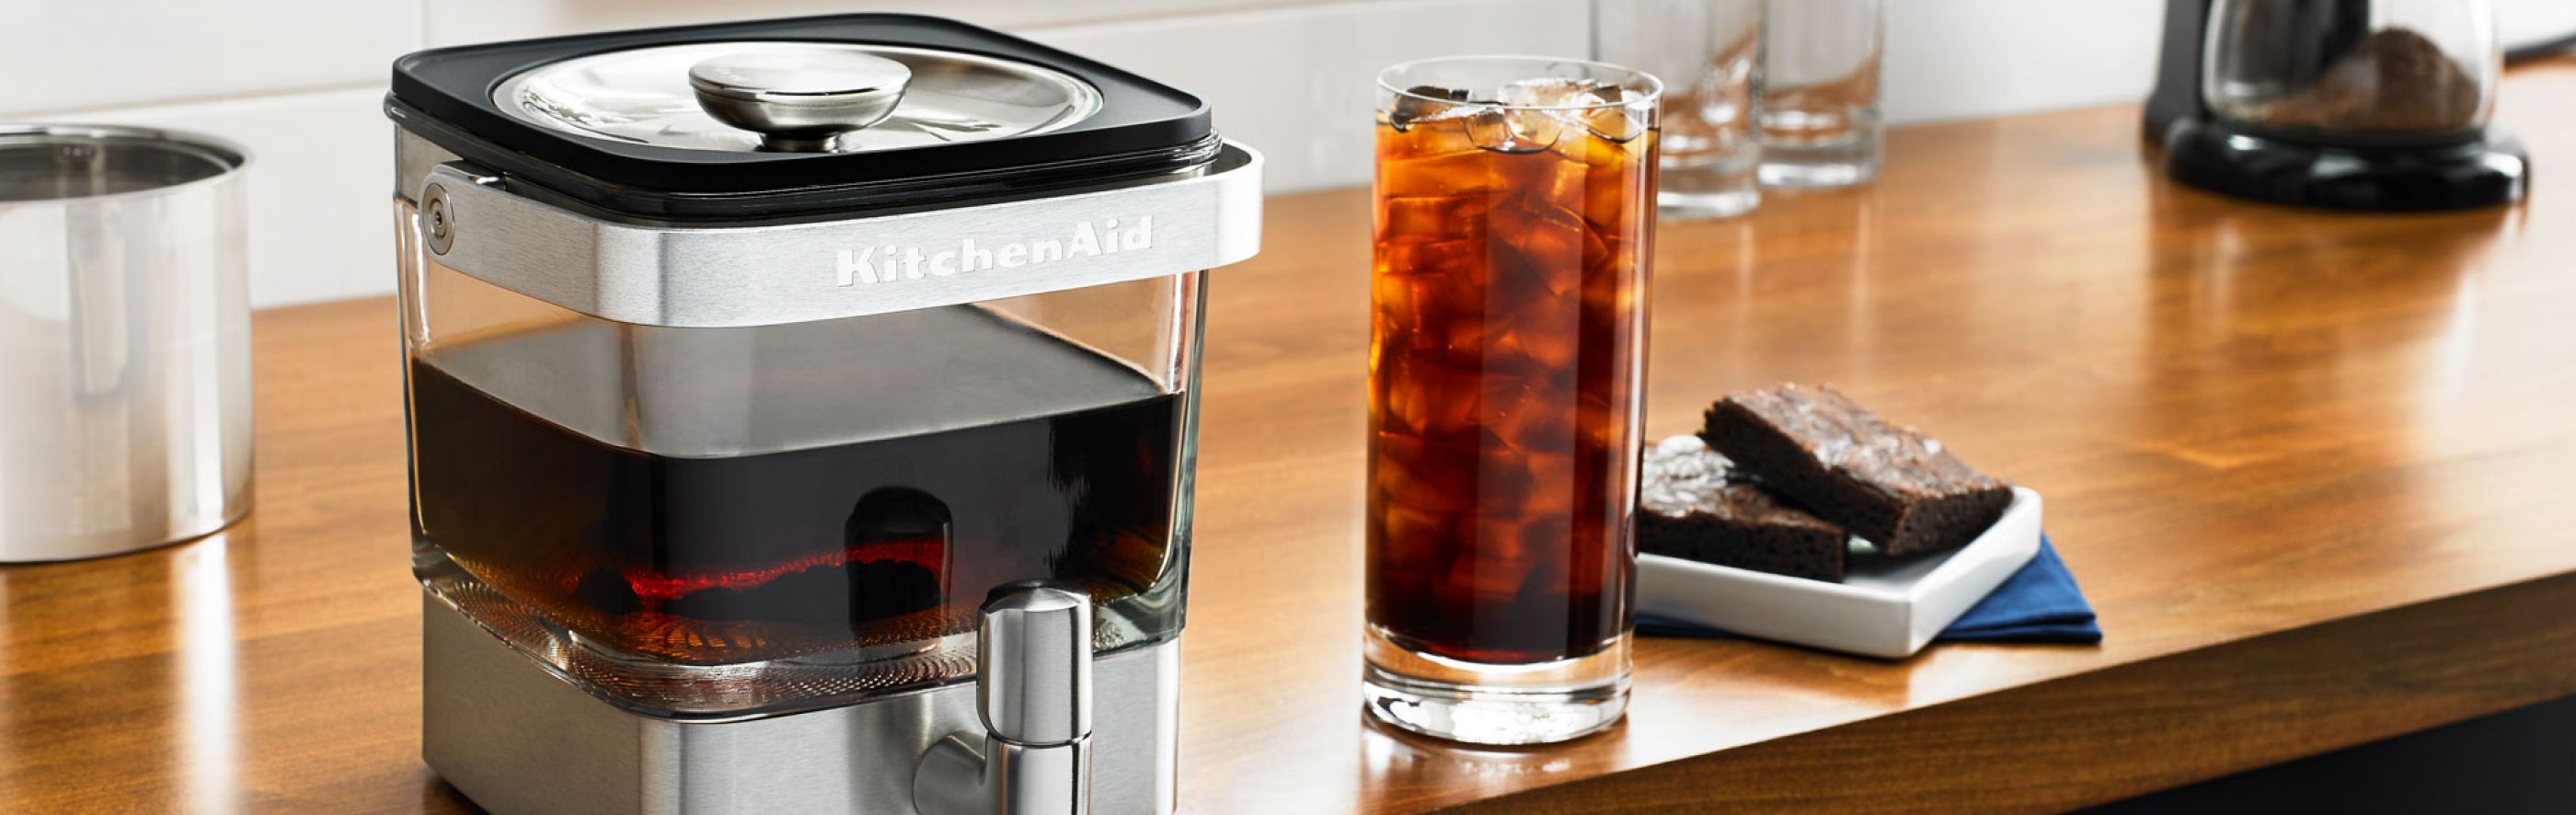 Cold brew coffee maker sitting on counter next to glass of iced coffee